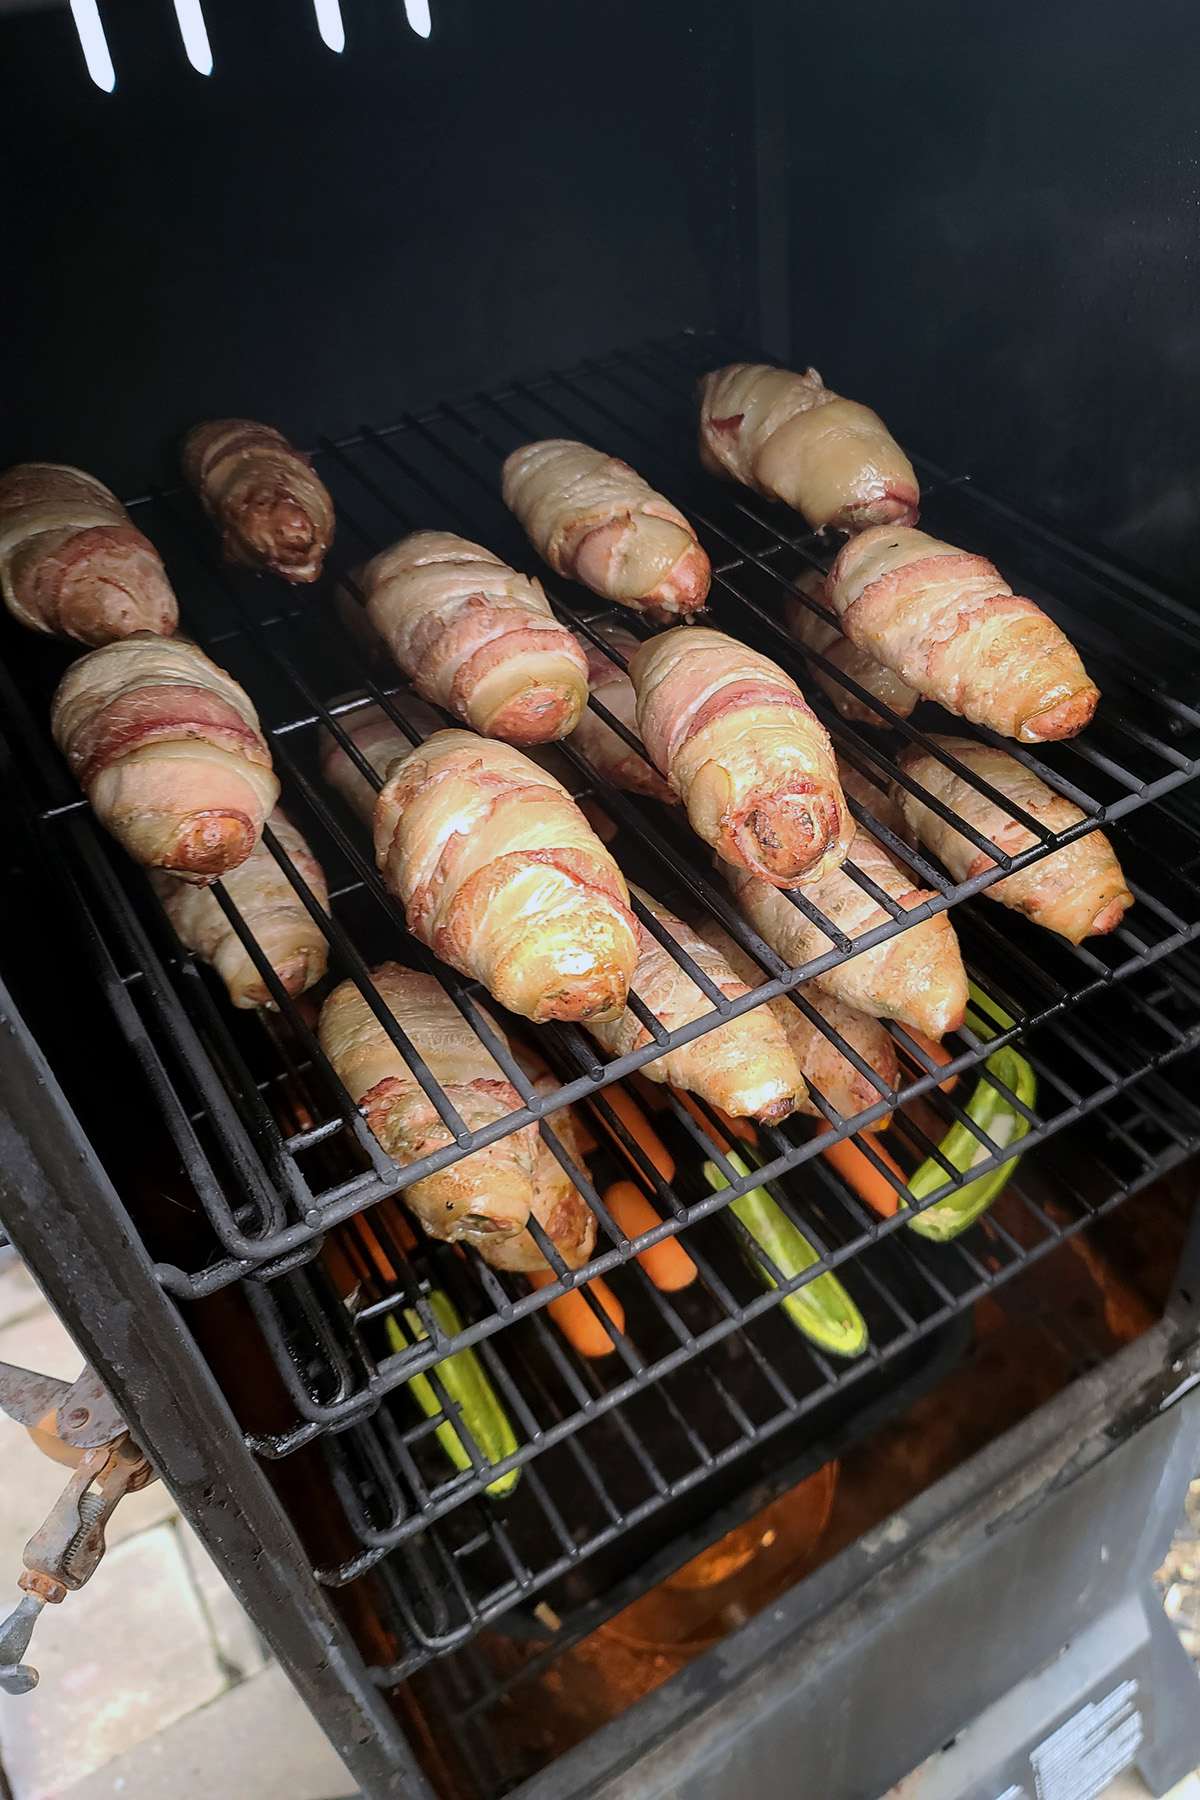 Bacon wrapped armadillo eggs being cooked in a smoker.